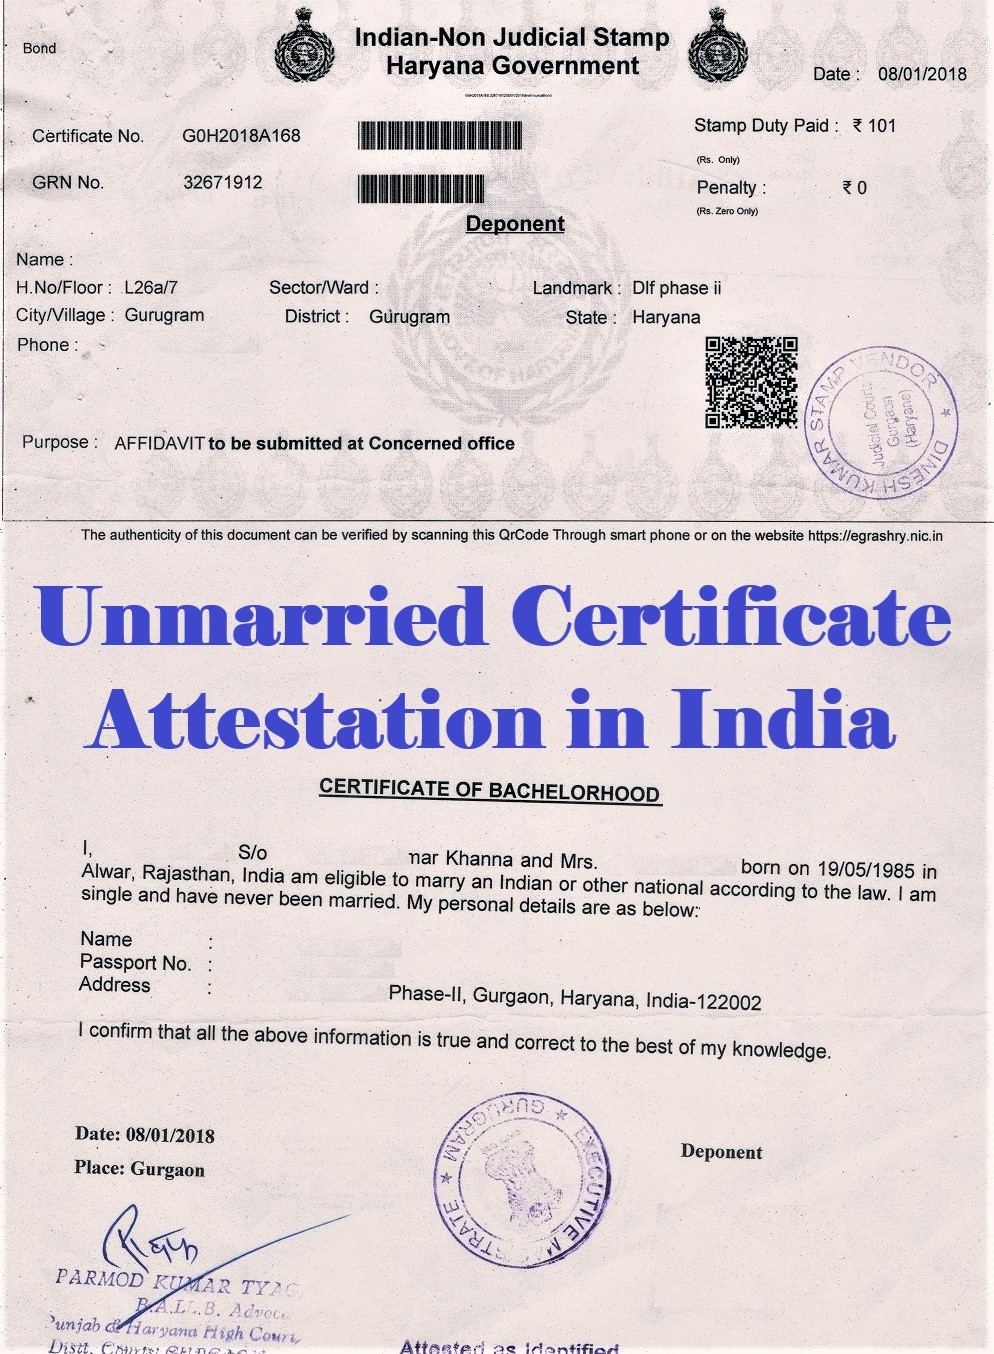 Unmarried Certificate Attestation from Kosovo Embassy